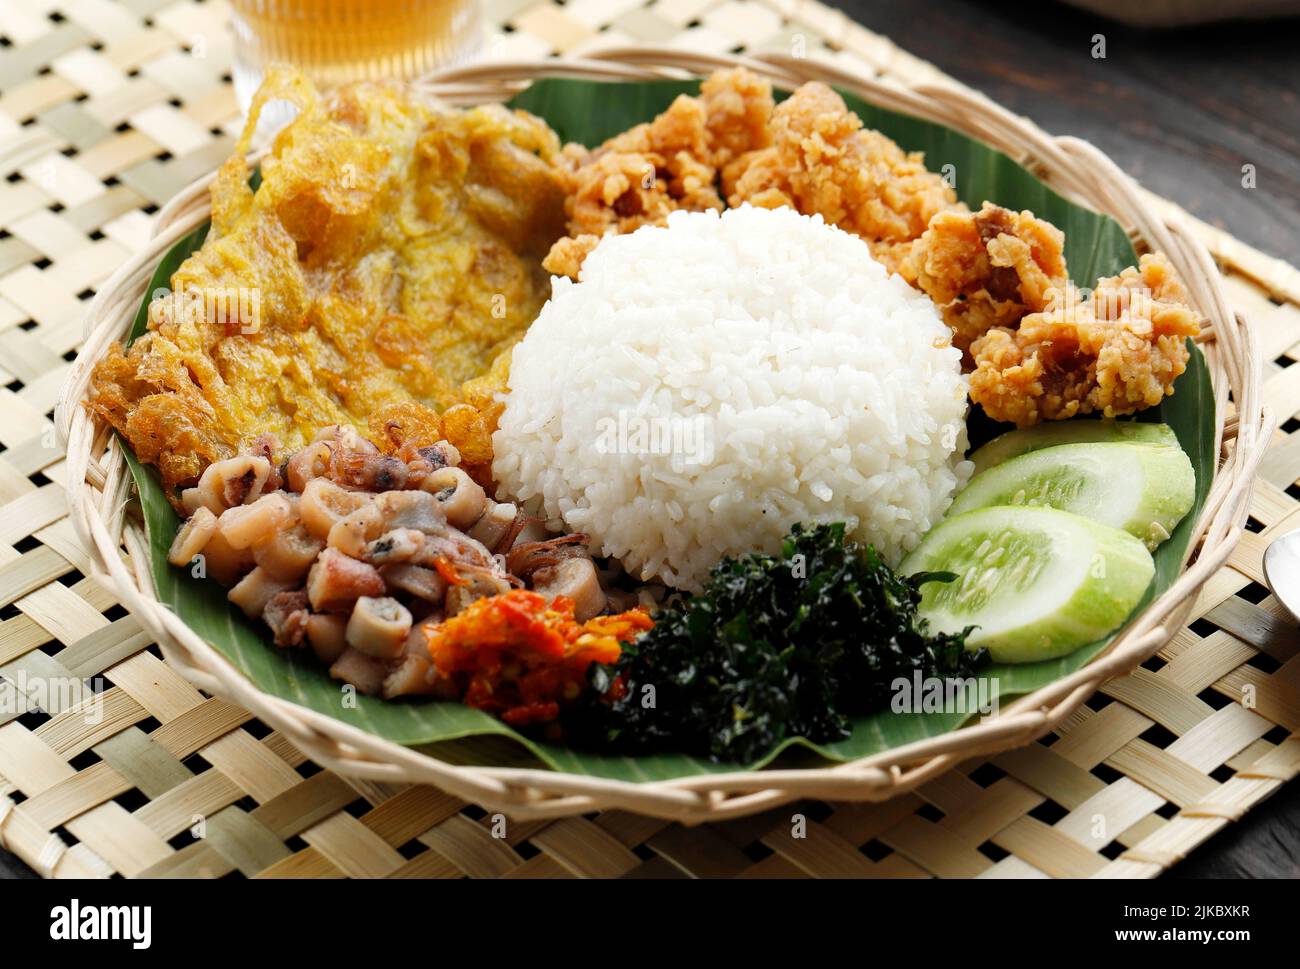 Nasi Campur Bali. Popular Balinese Street Food Meal of Rice with Variety Side Dishes. Selected Focus Stock Photo